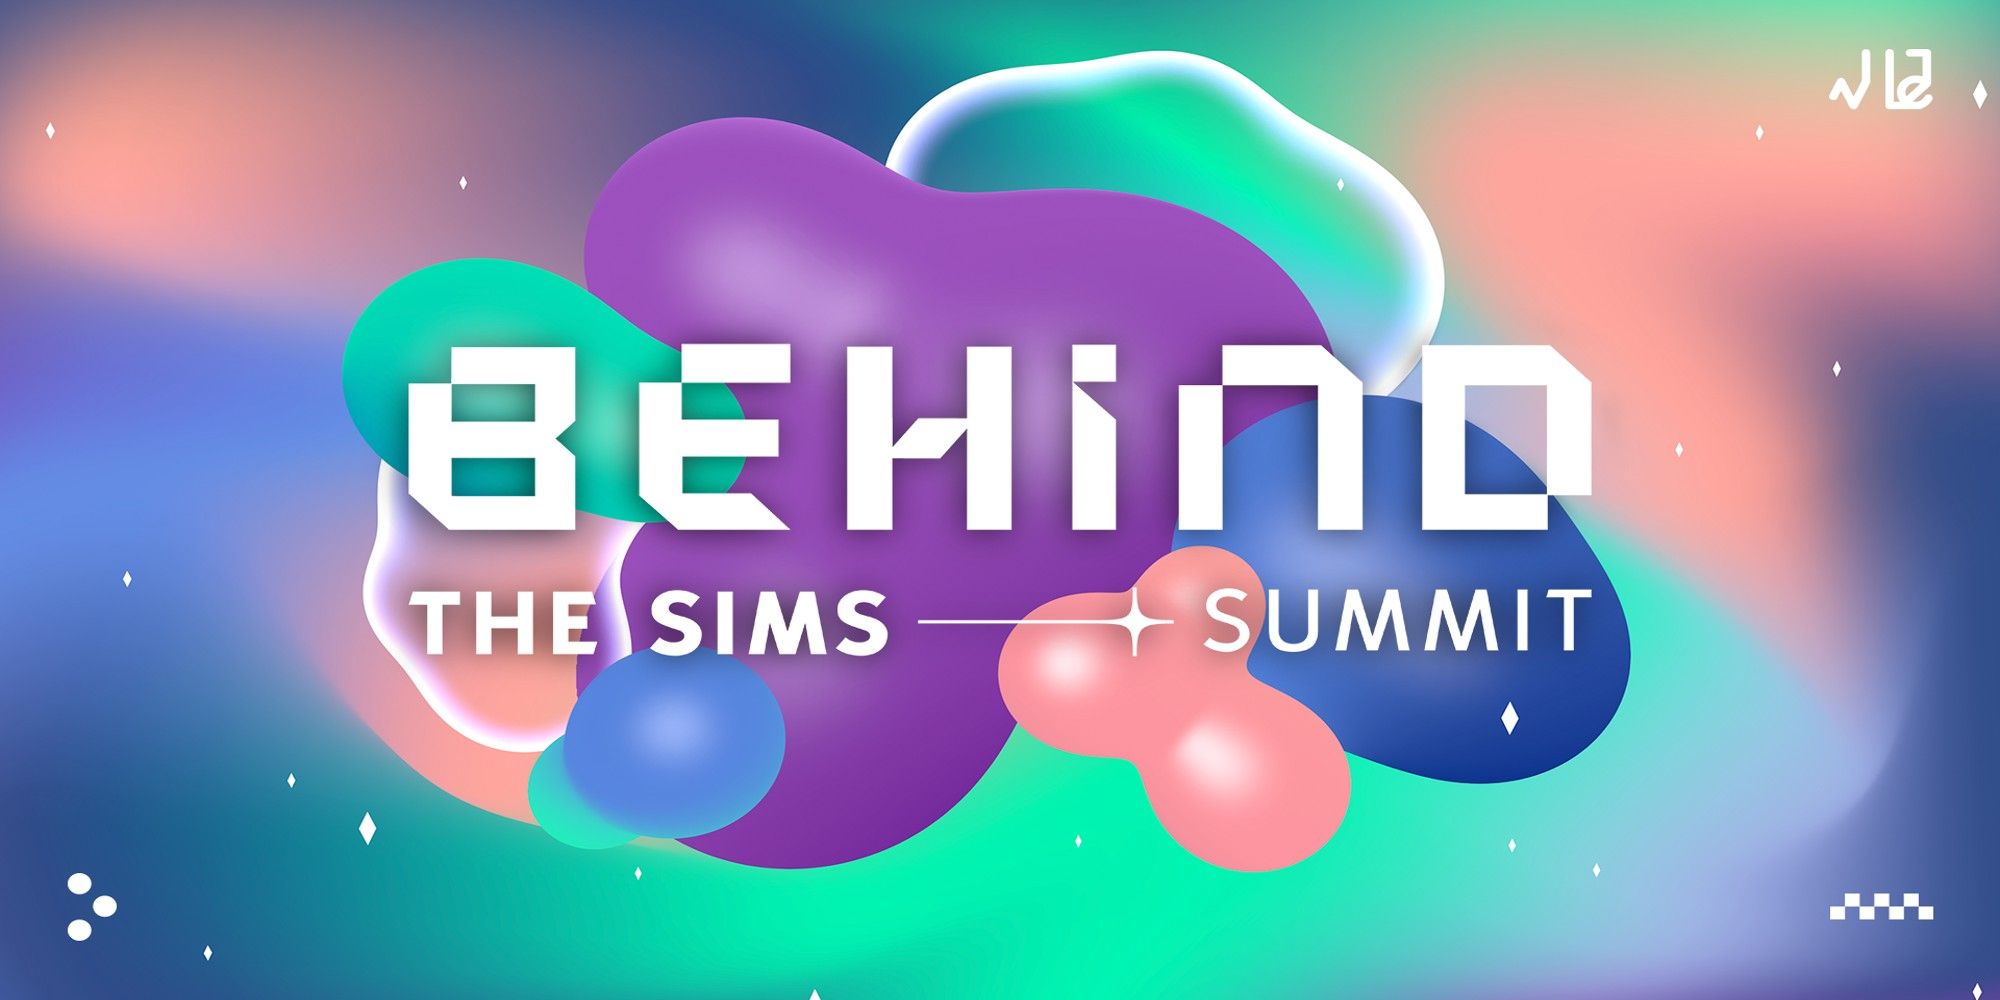 Behind The Sims Summit title art.